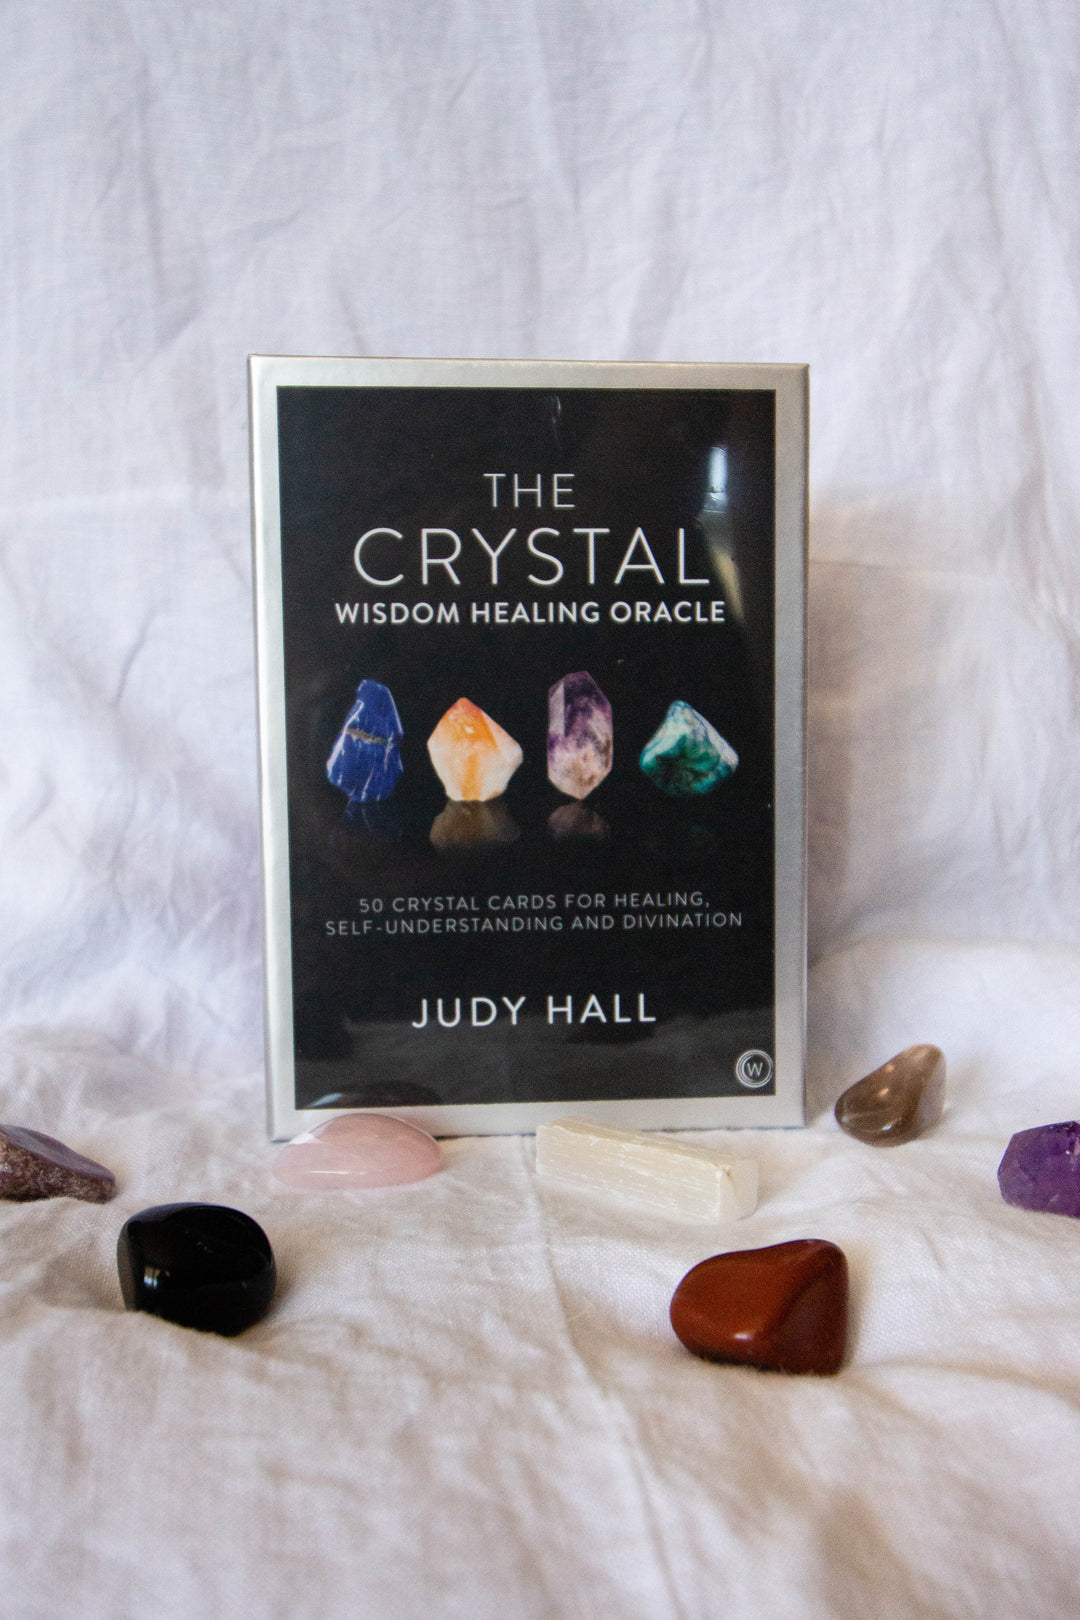 THE CRYSTA WISDOM HEALING ORACLE CARDS